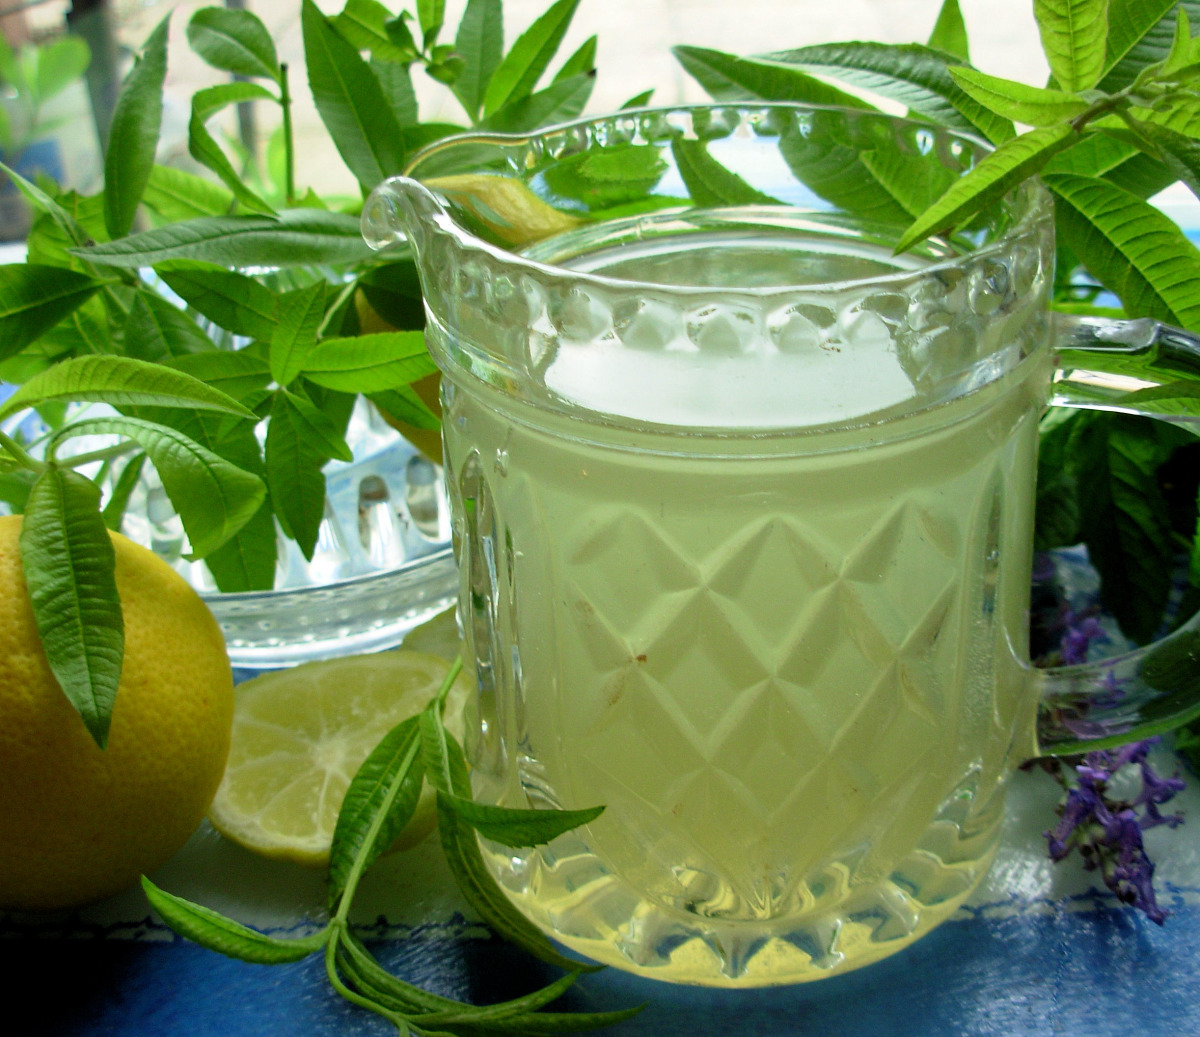 Cocktail & Sons Mint and Lemon Verbena Syrup